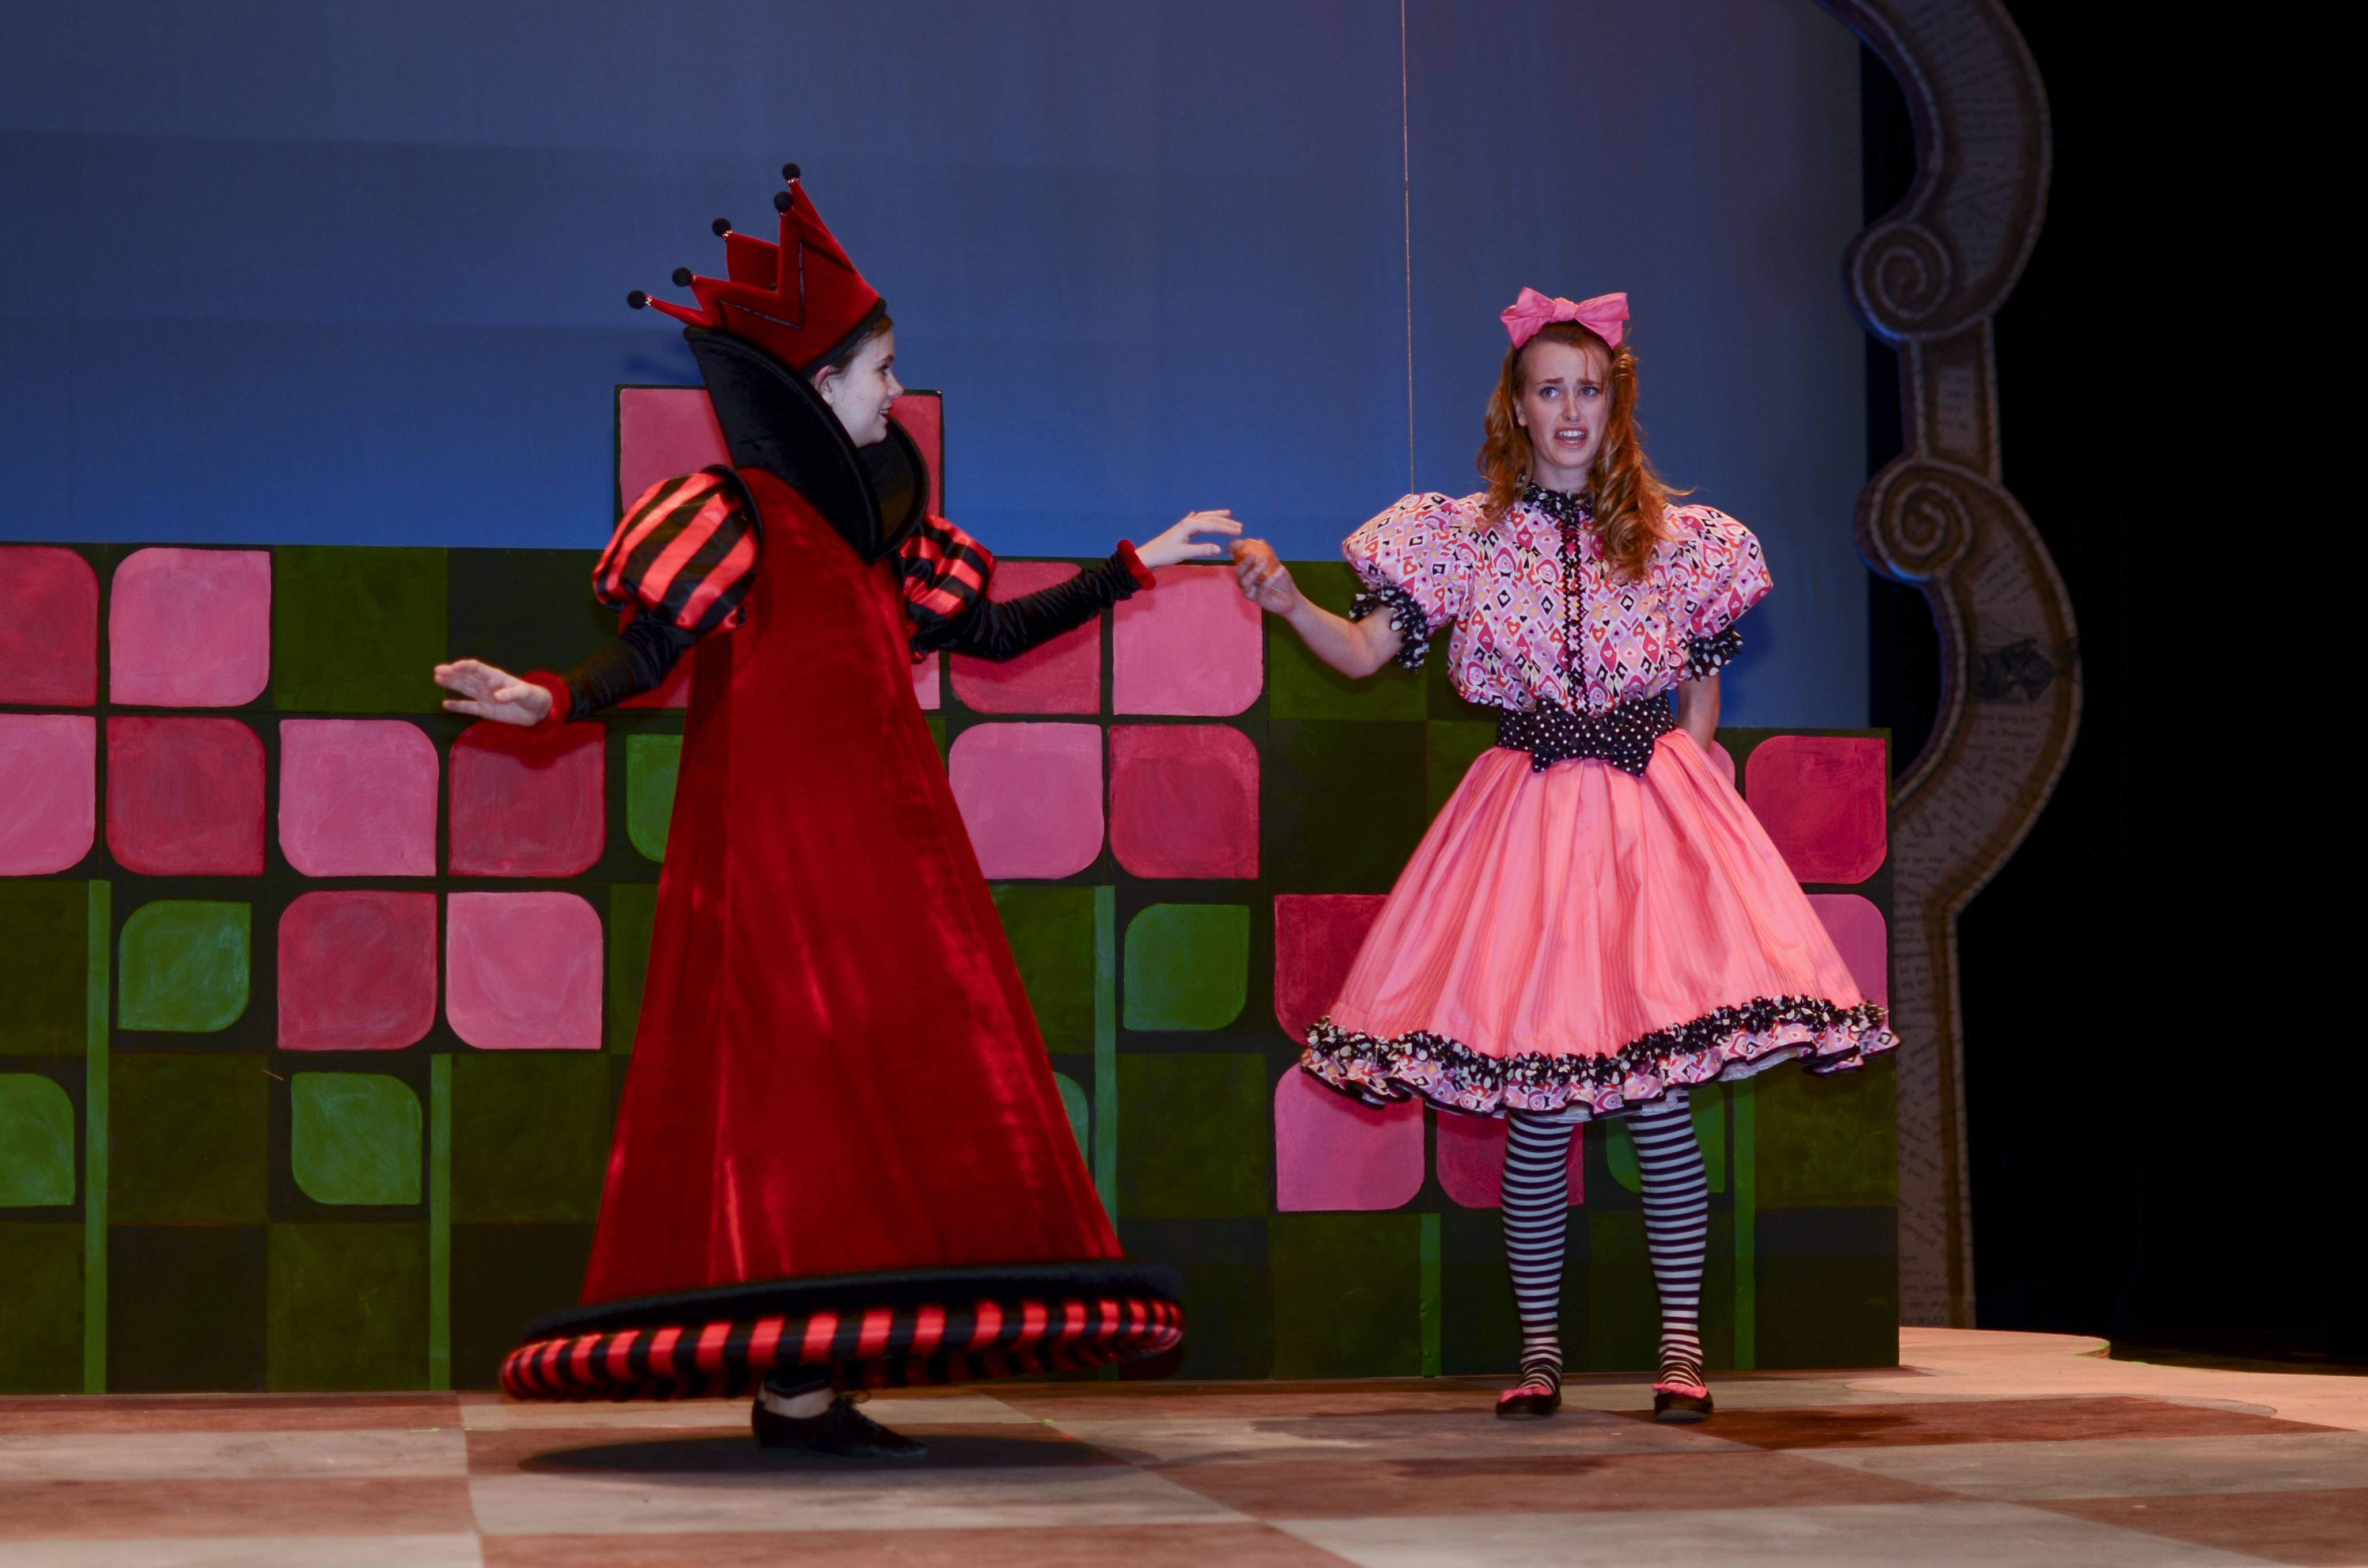 MAGICAL TALE - Red Deer College students Julia Van Dam as Alice and Jessica Bordley as the Red Queen rehearse a scene from Alice Through The Looking Glass. The show opens on Nov. 21st on the Arts Centre mainstage.